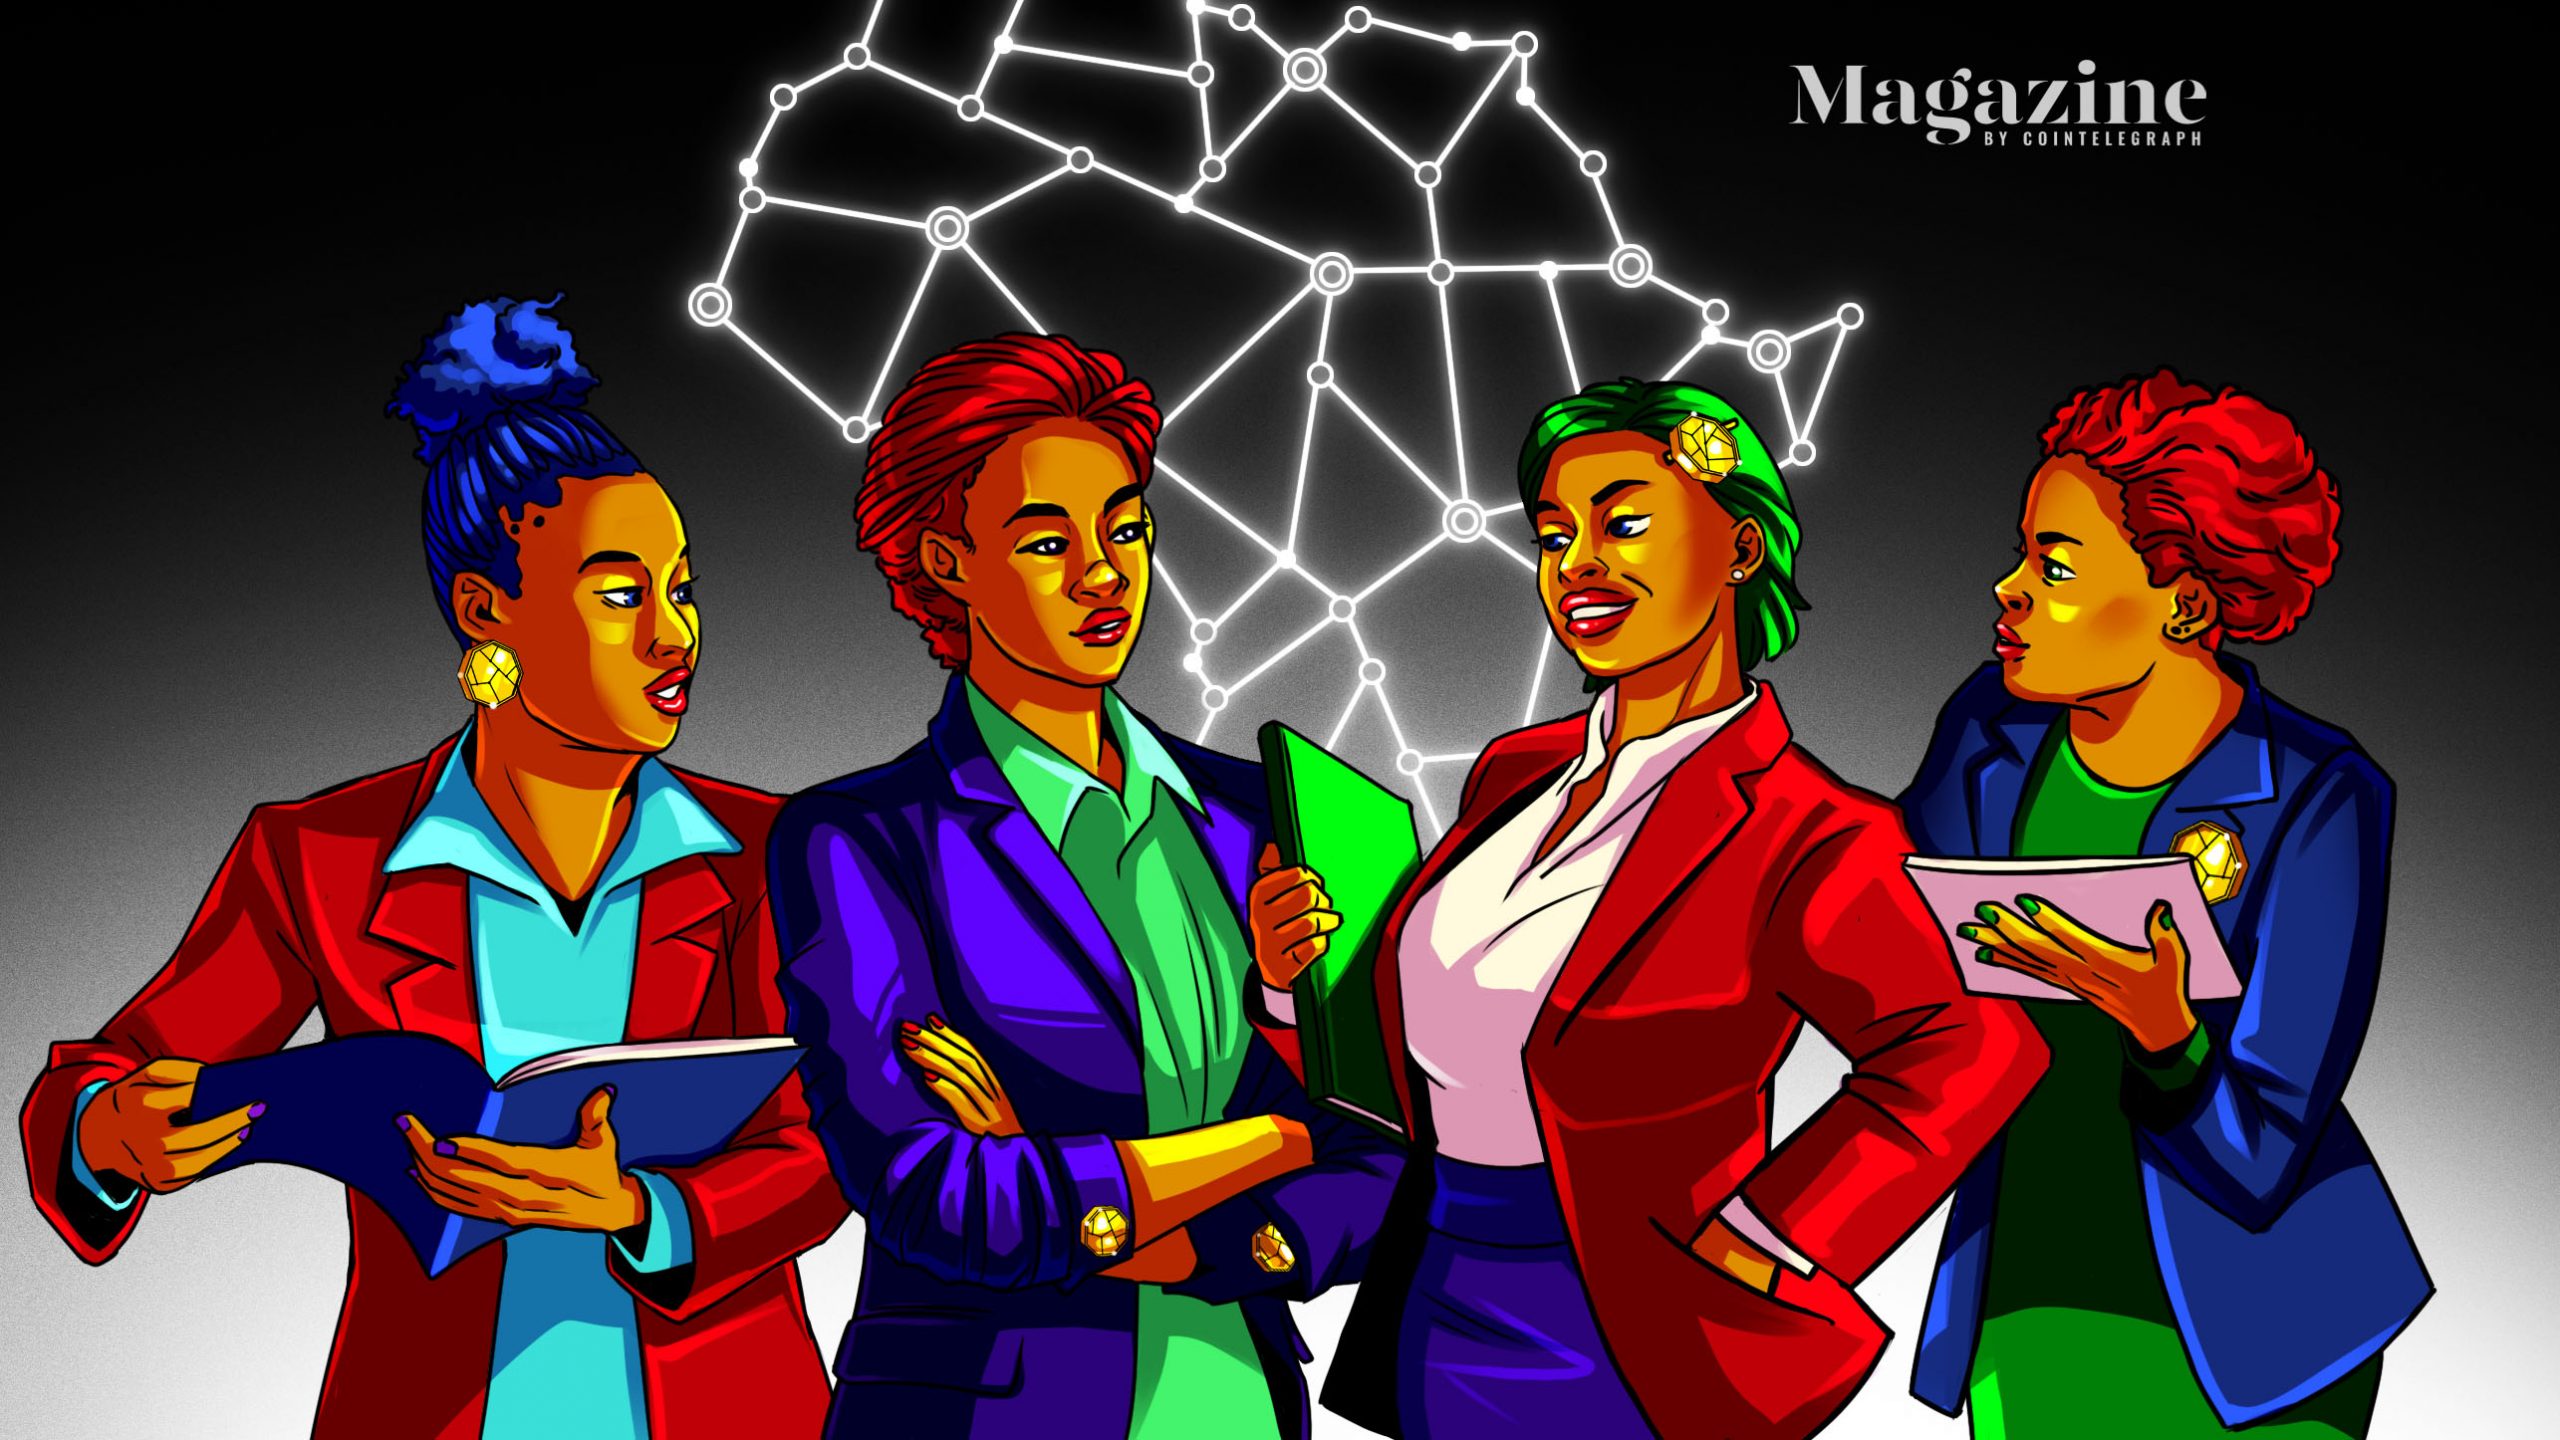 Championing-blockchain-education-in-africa:-women-leading-the-bitcoin-cause